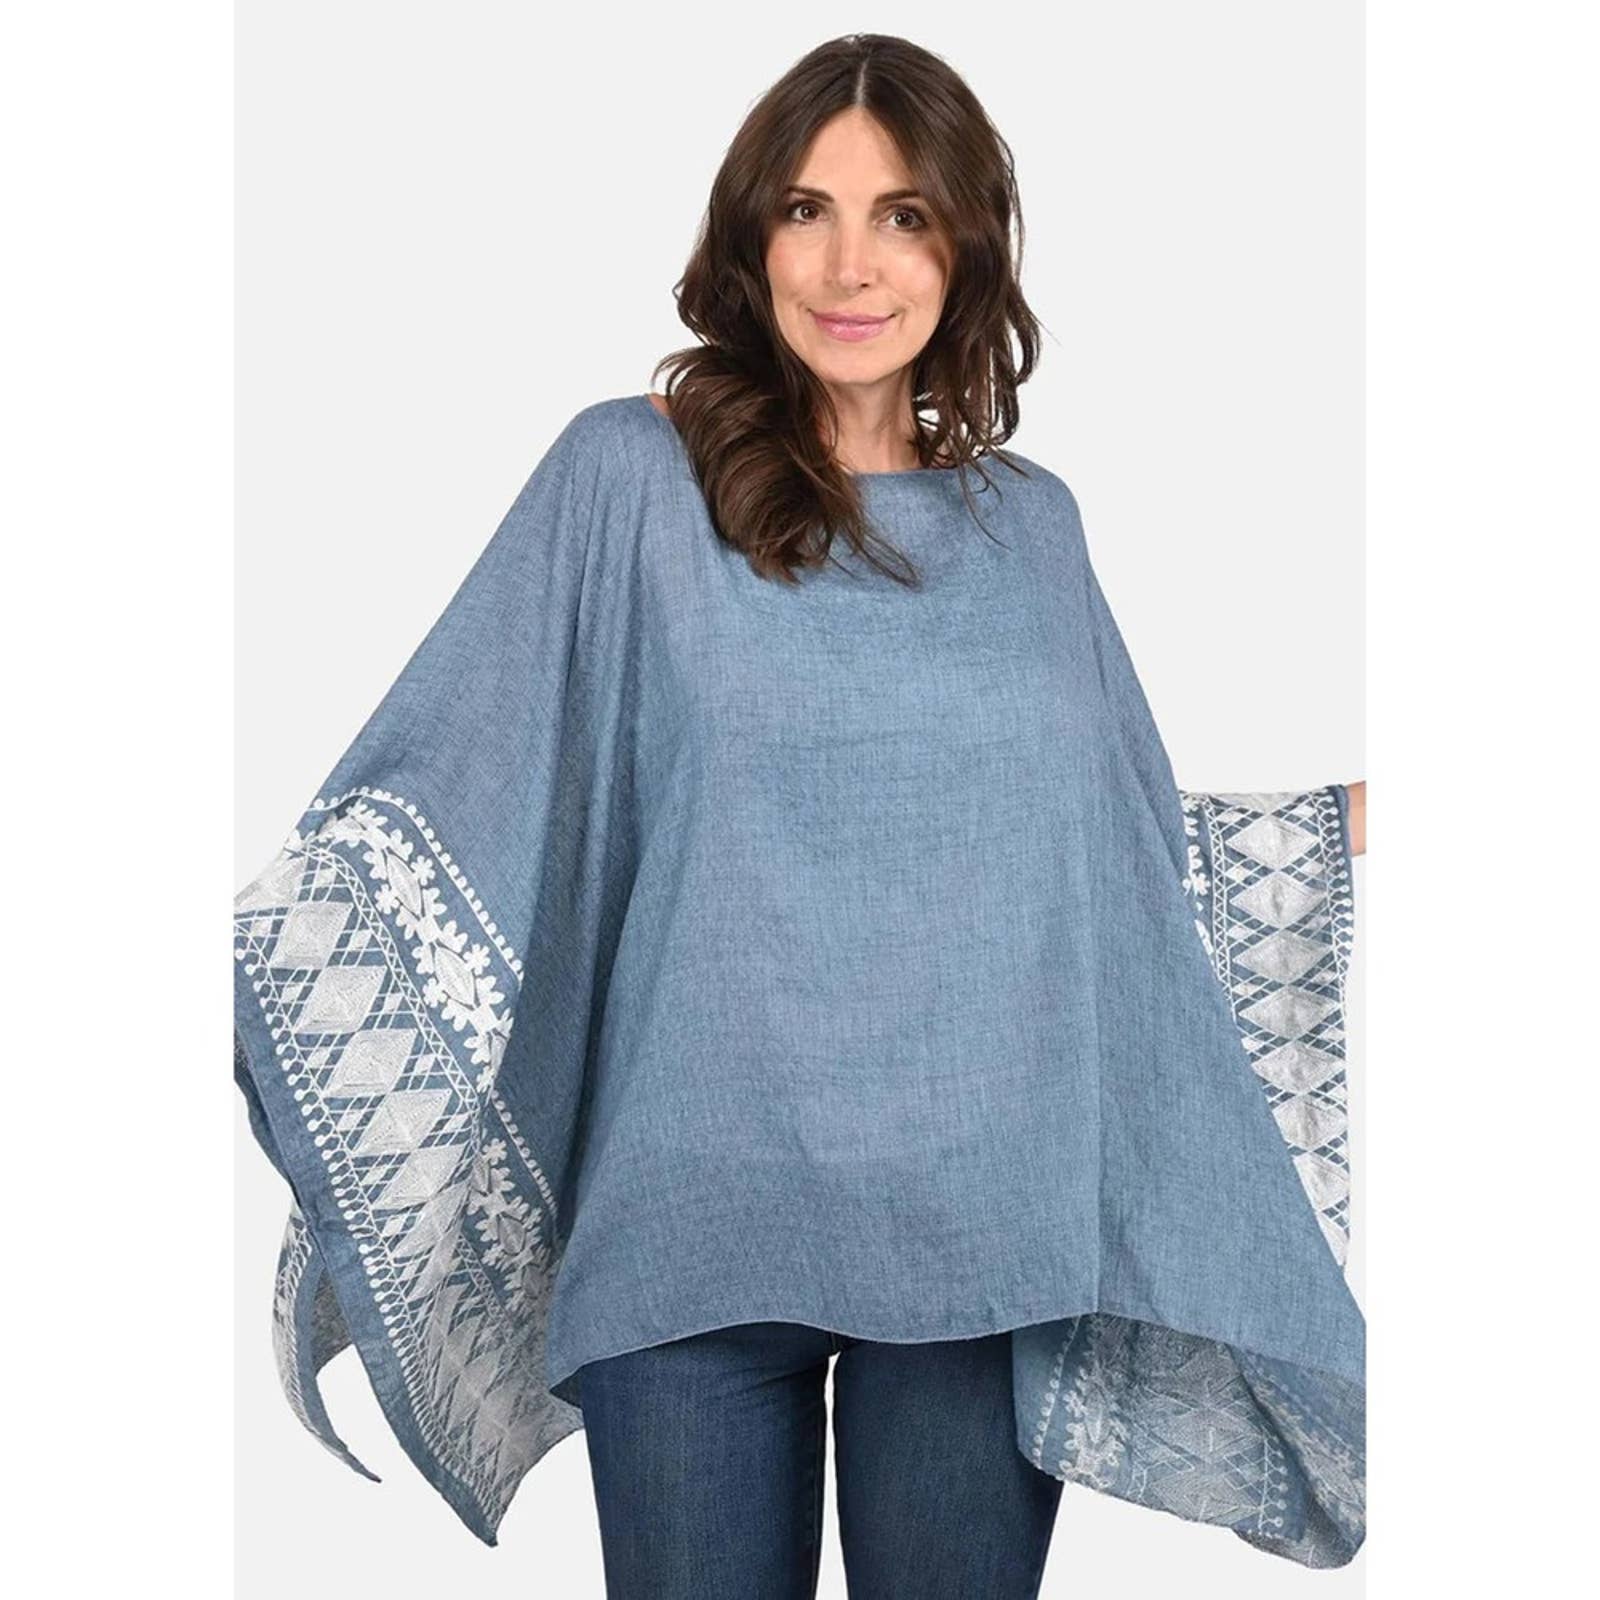 Passion Slate Blue White Embroidered Sleeve Boat Neck Kaftan Top - Passion of Essence Boutique